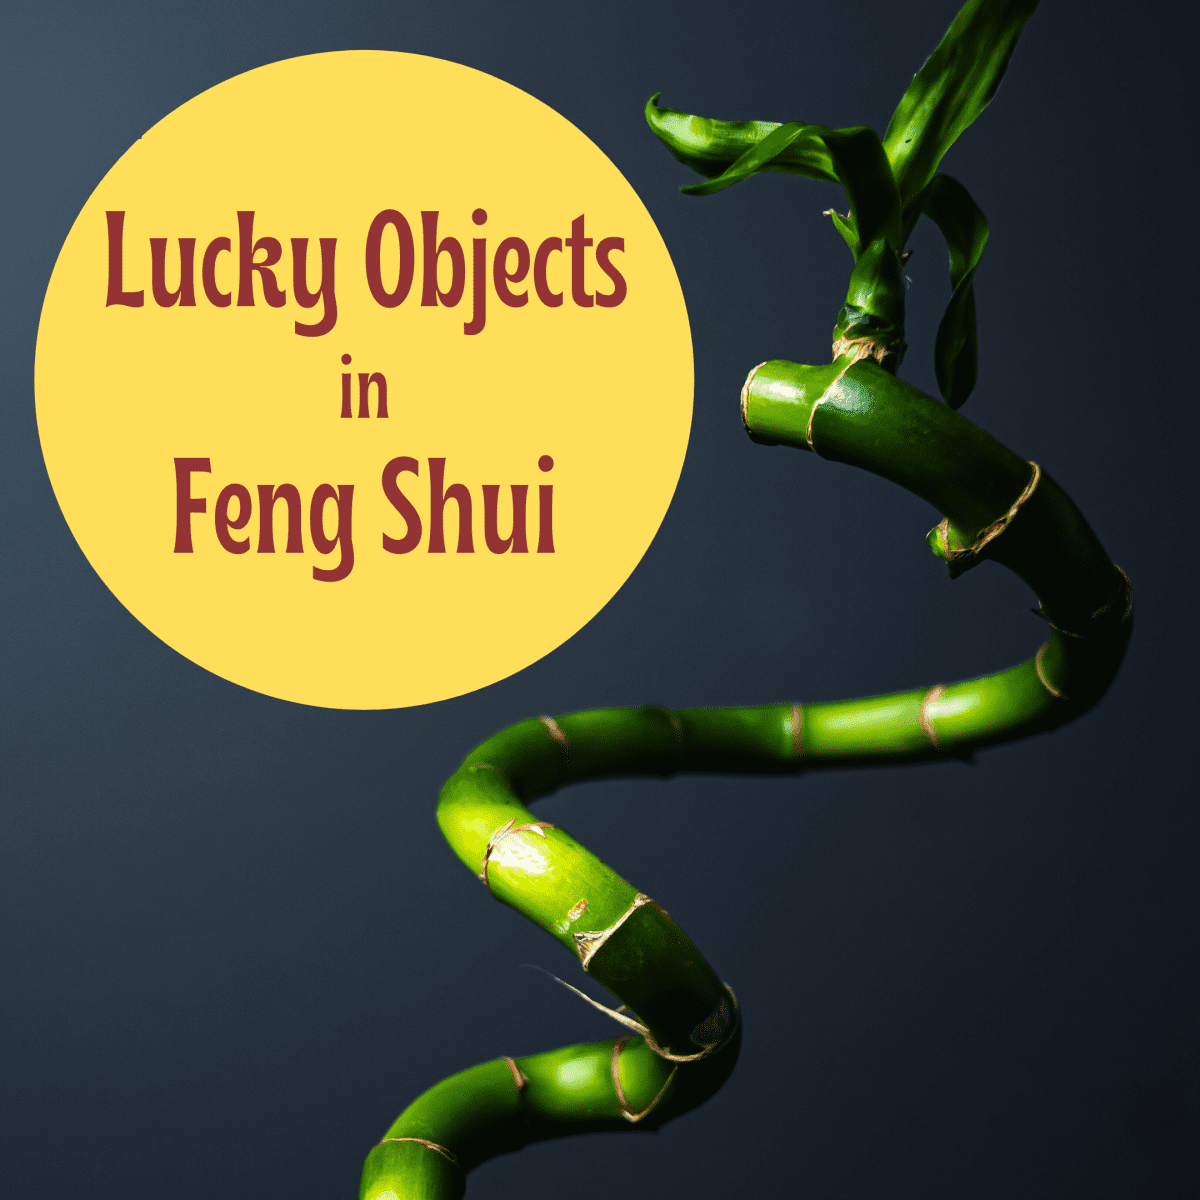 Feng shui guides room placement to avoid negativity